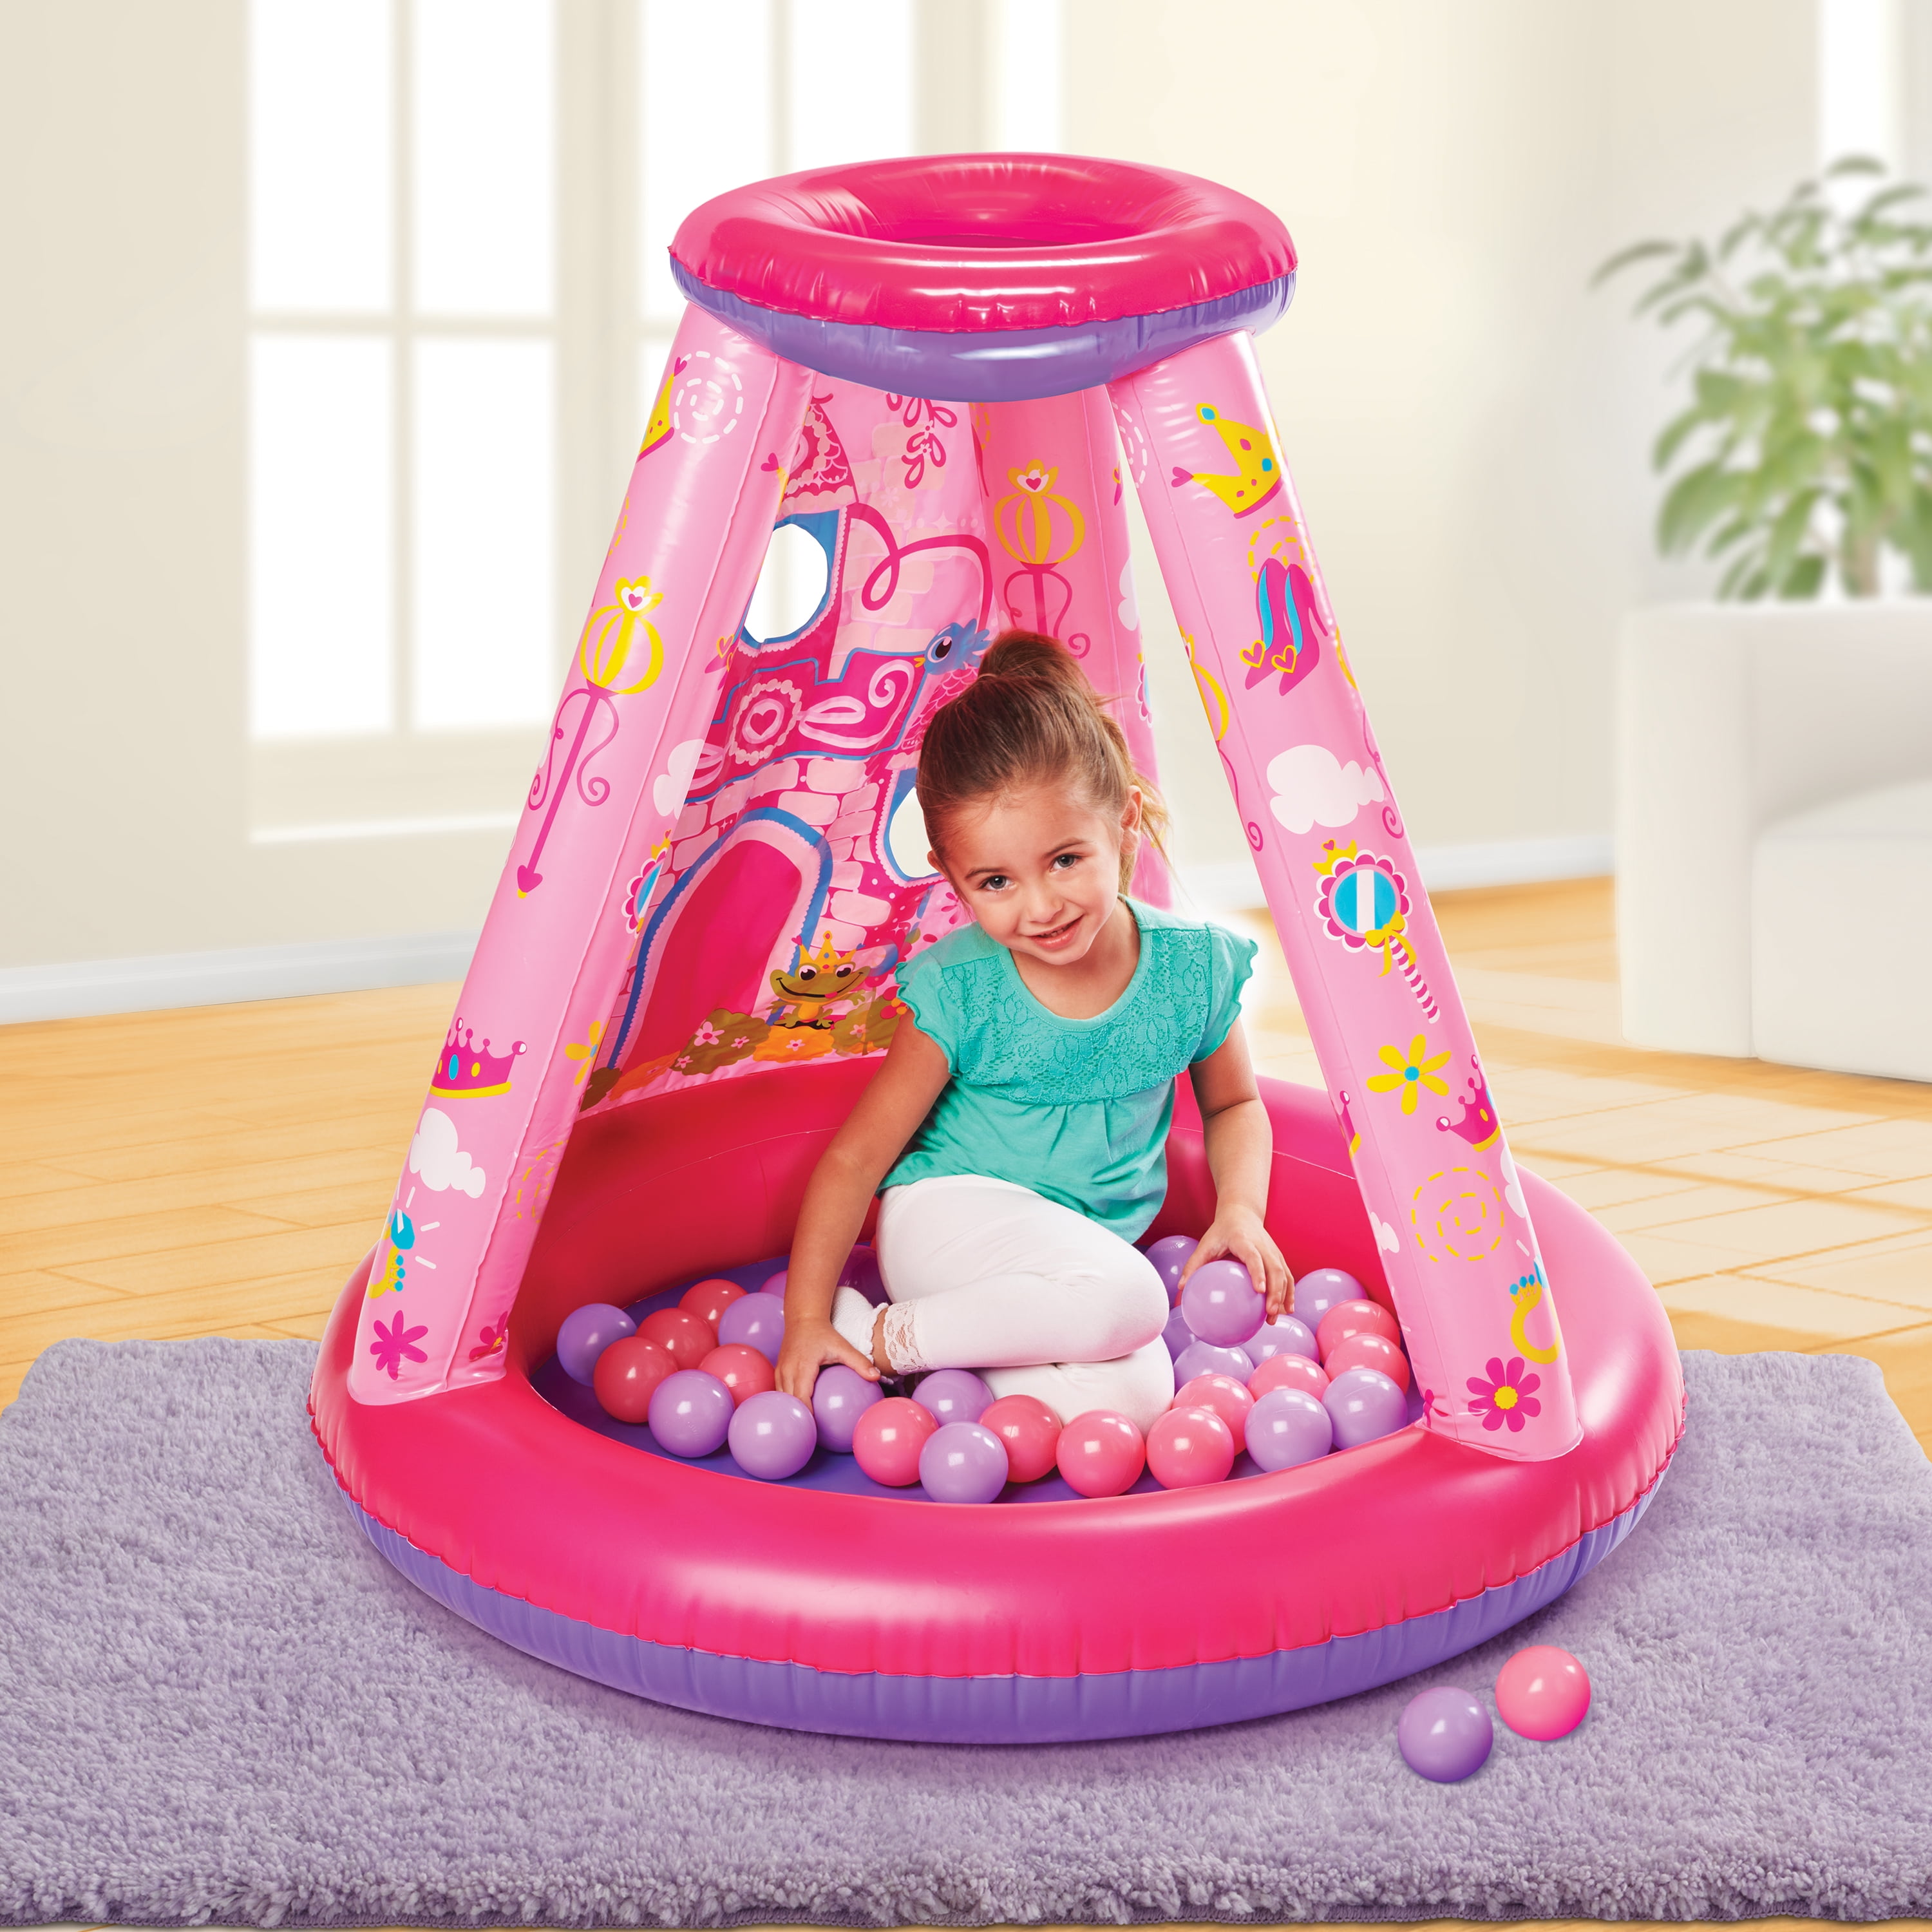 Kiddey Kids Ball Pit Play Tent 100 Balls Pops Up No Assembly Required Use As / 